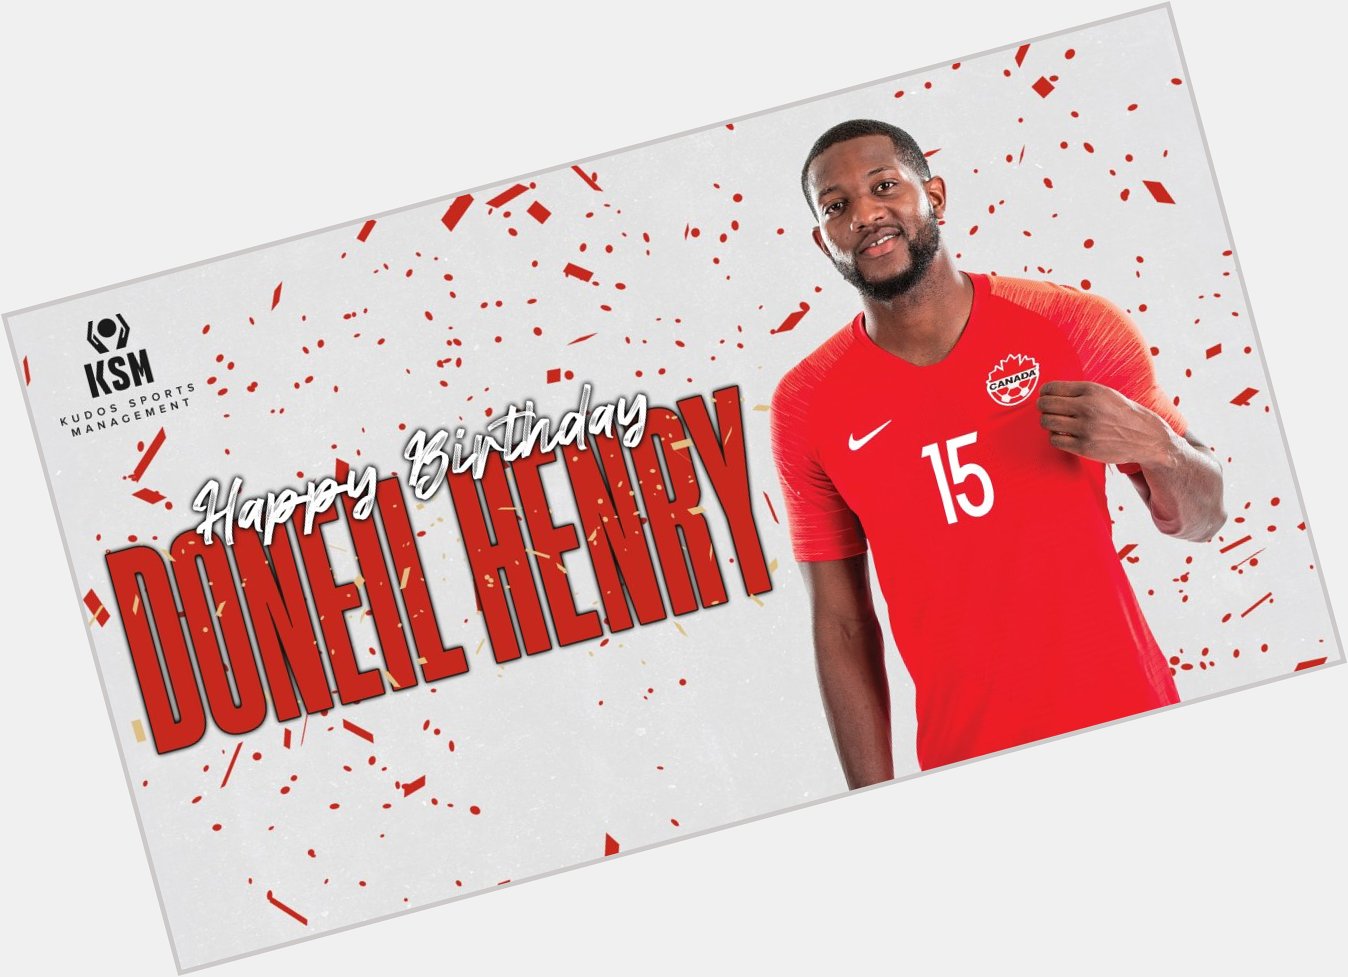 Wishing Doneil Henry a very happy birthday today! Enjoy your day, Doneil!  